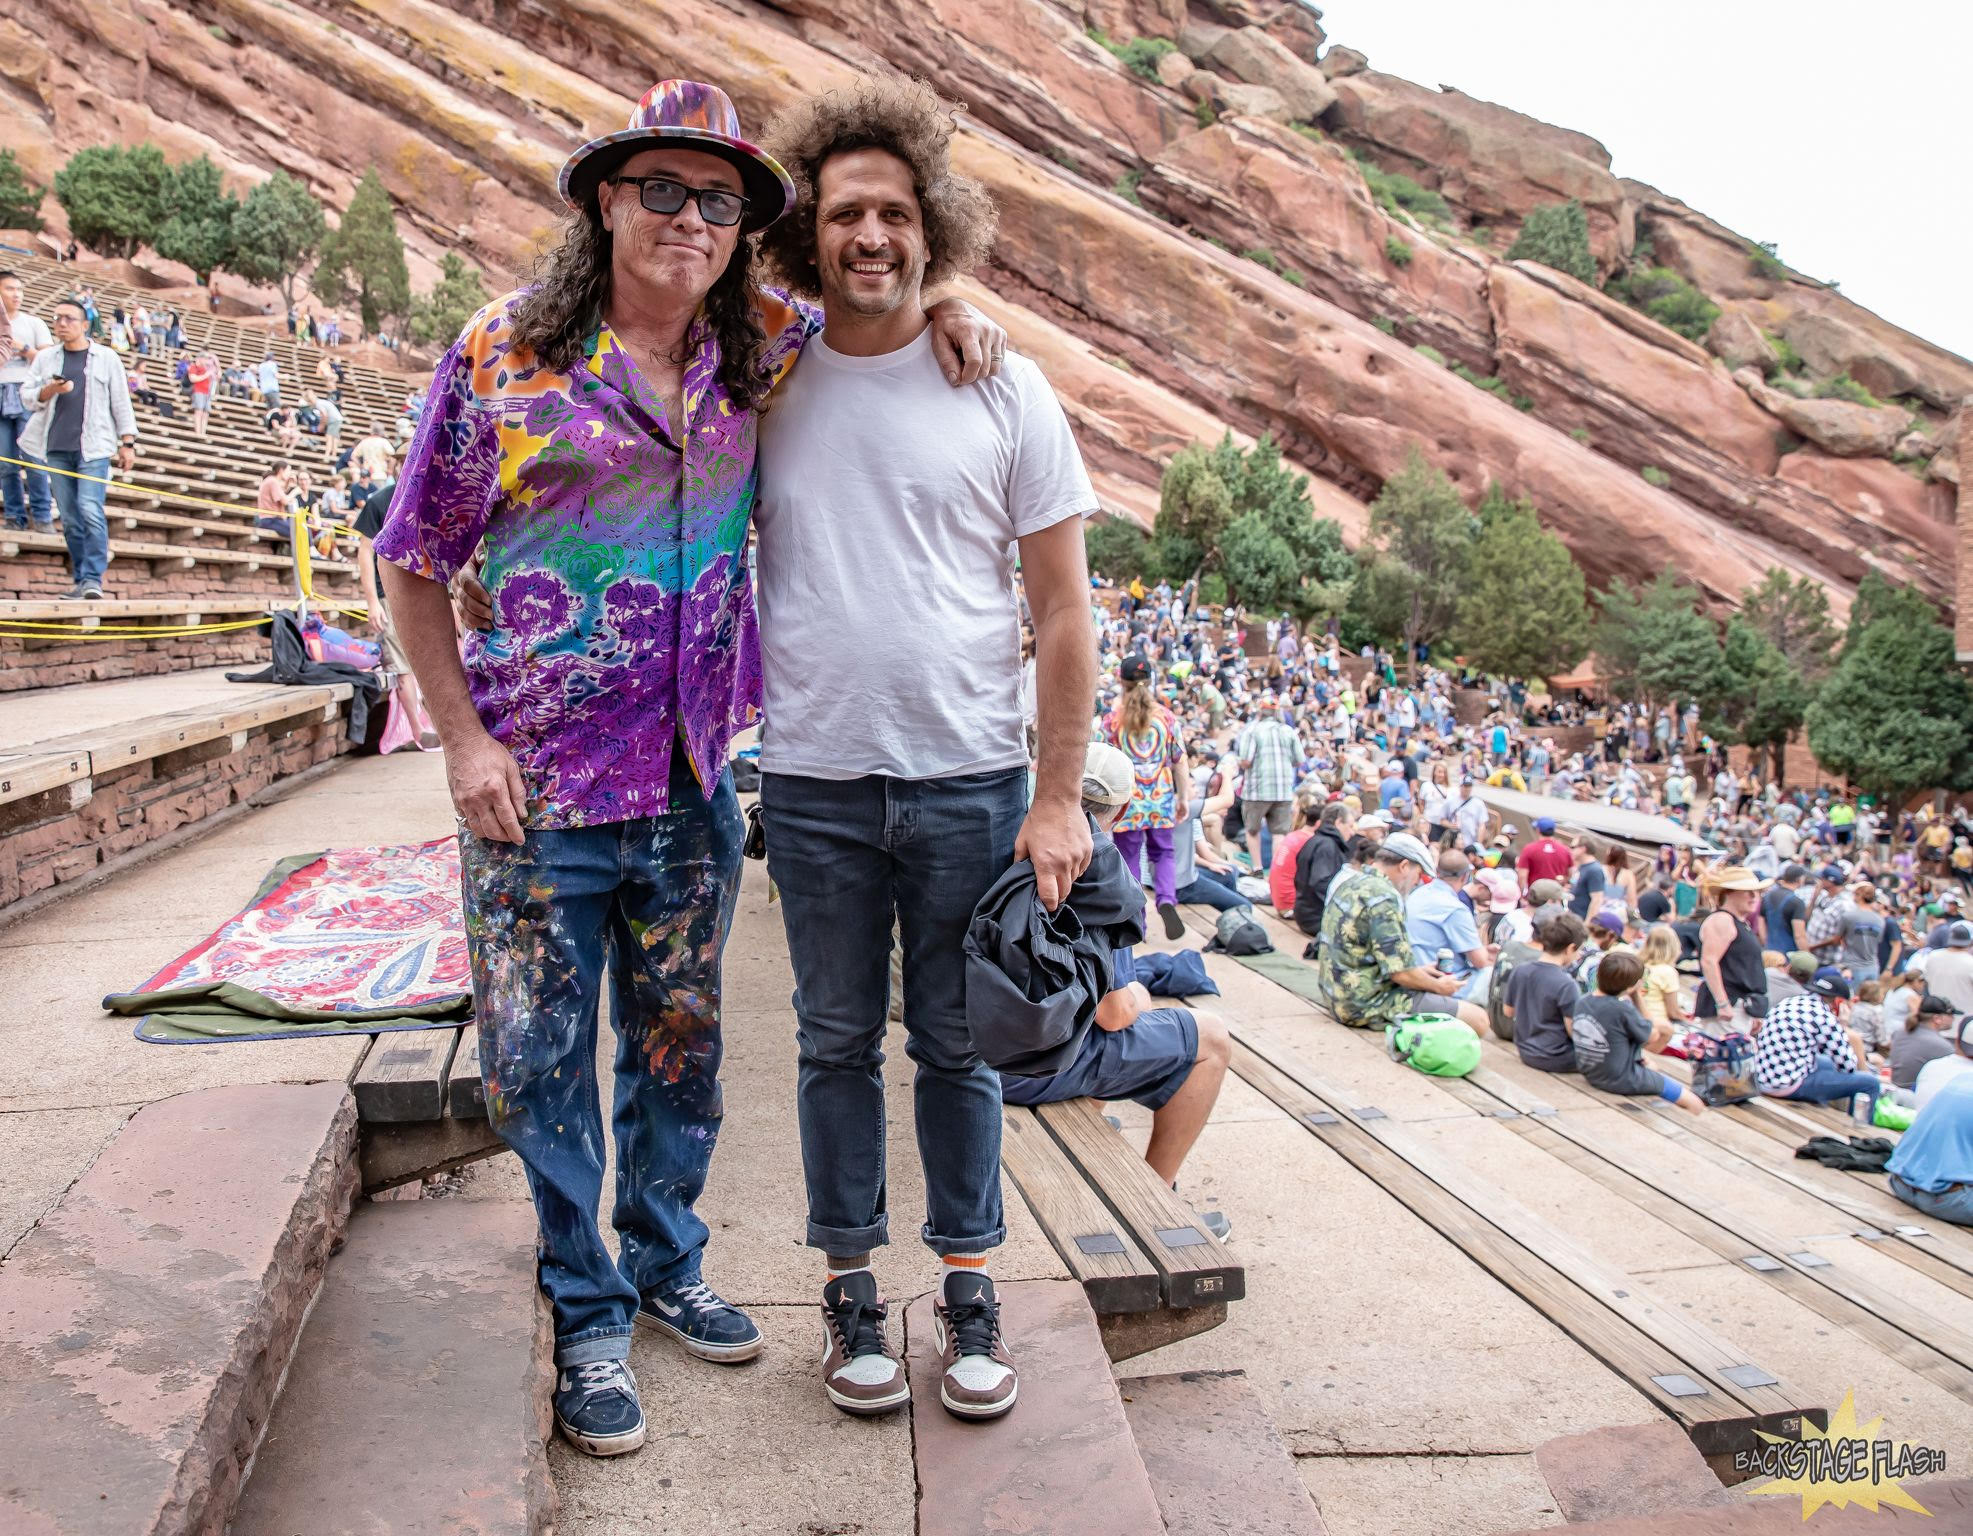 Scramble Campbell and Andy Frasco | Red Rocks Amphitheatre